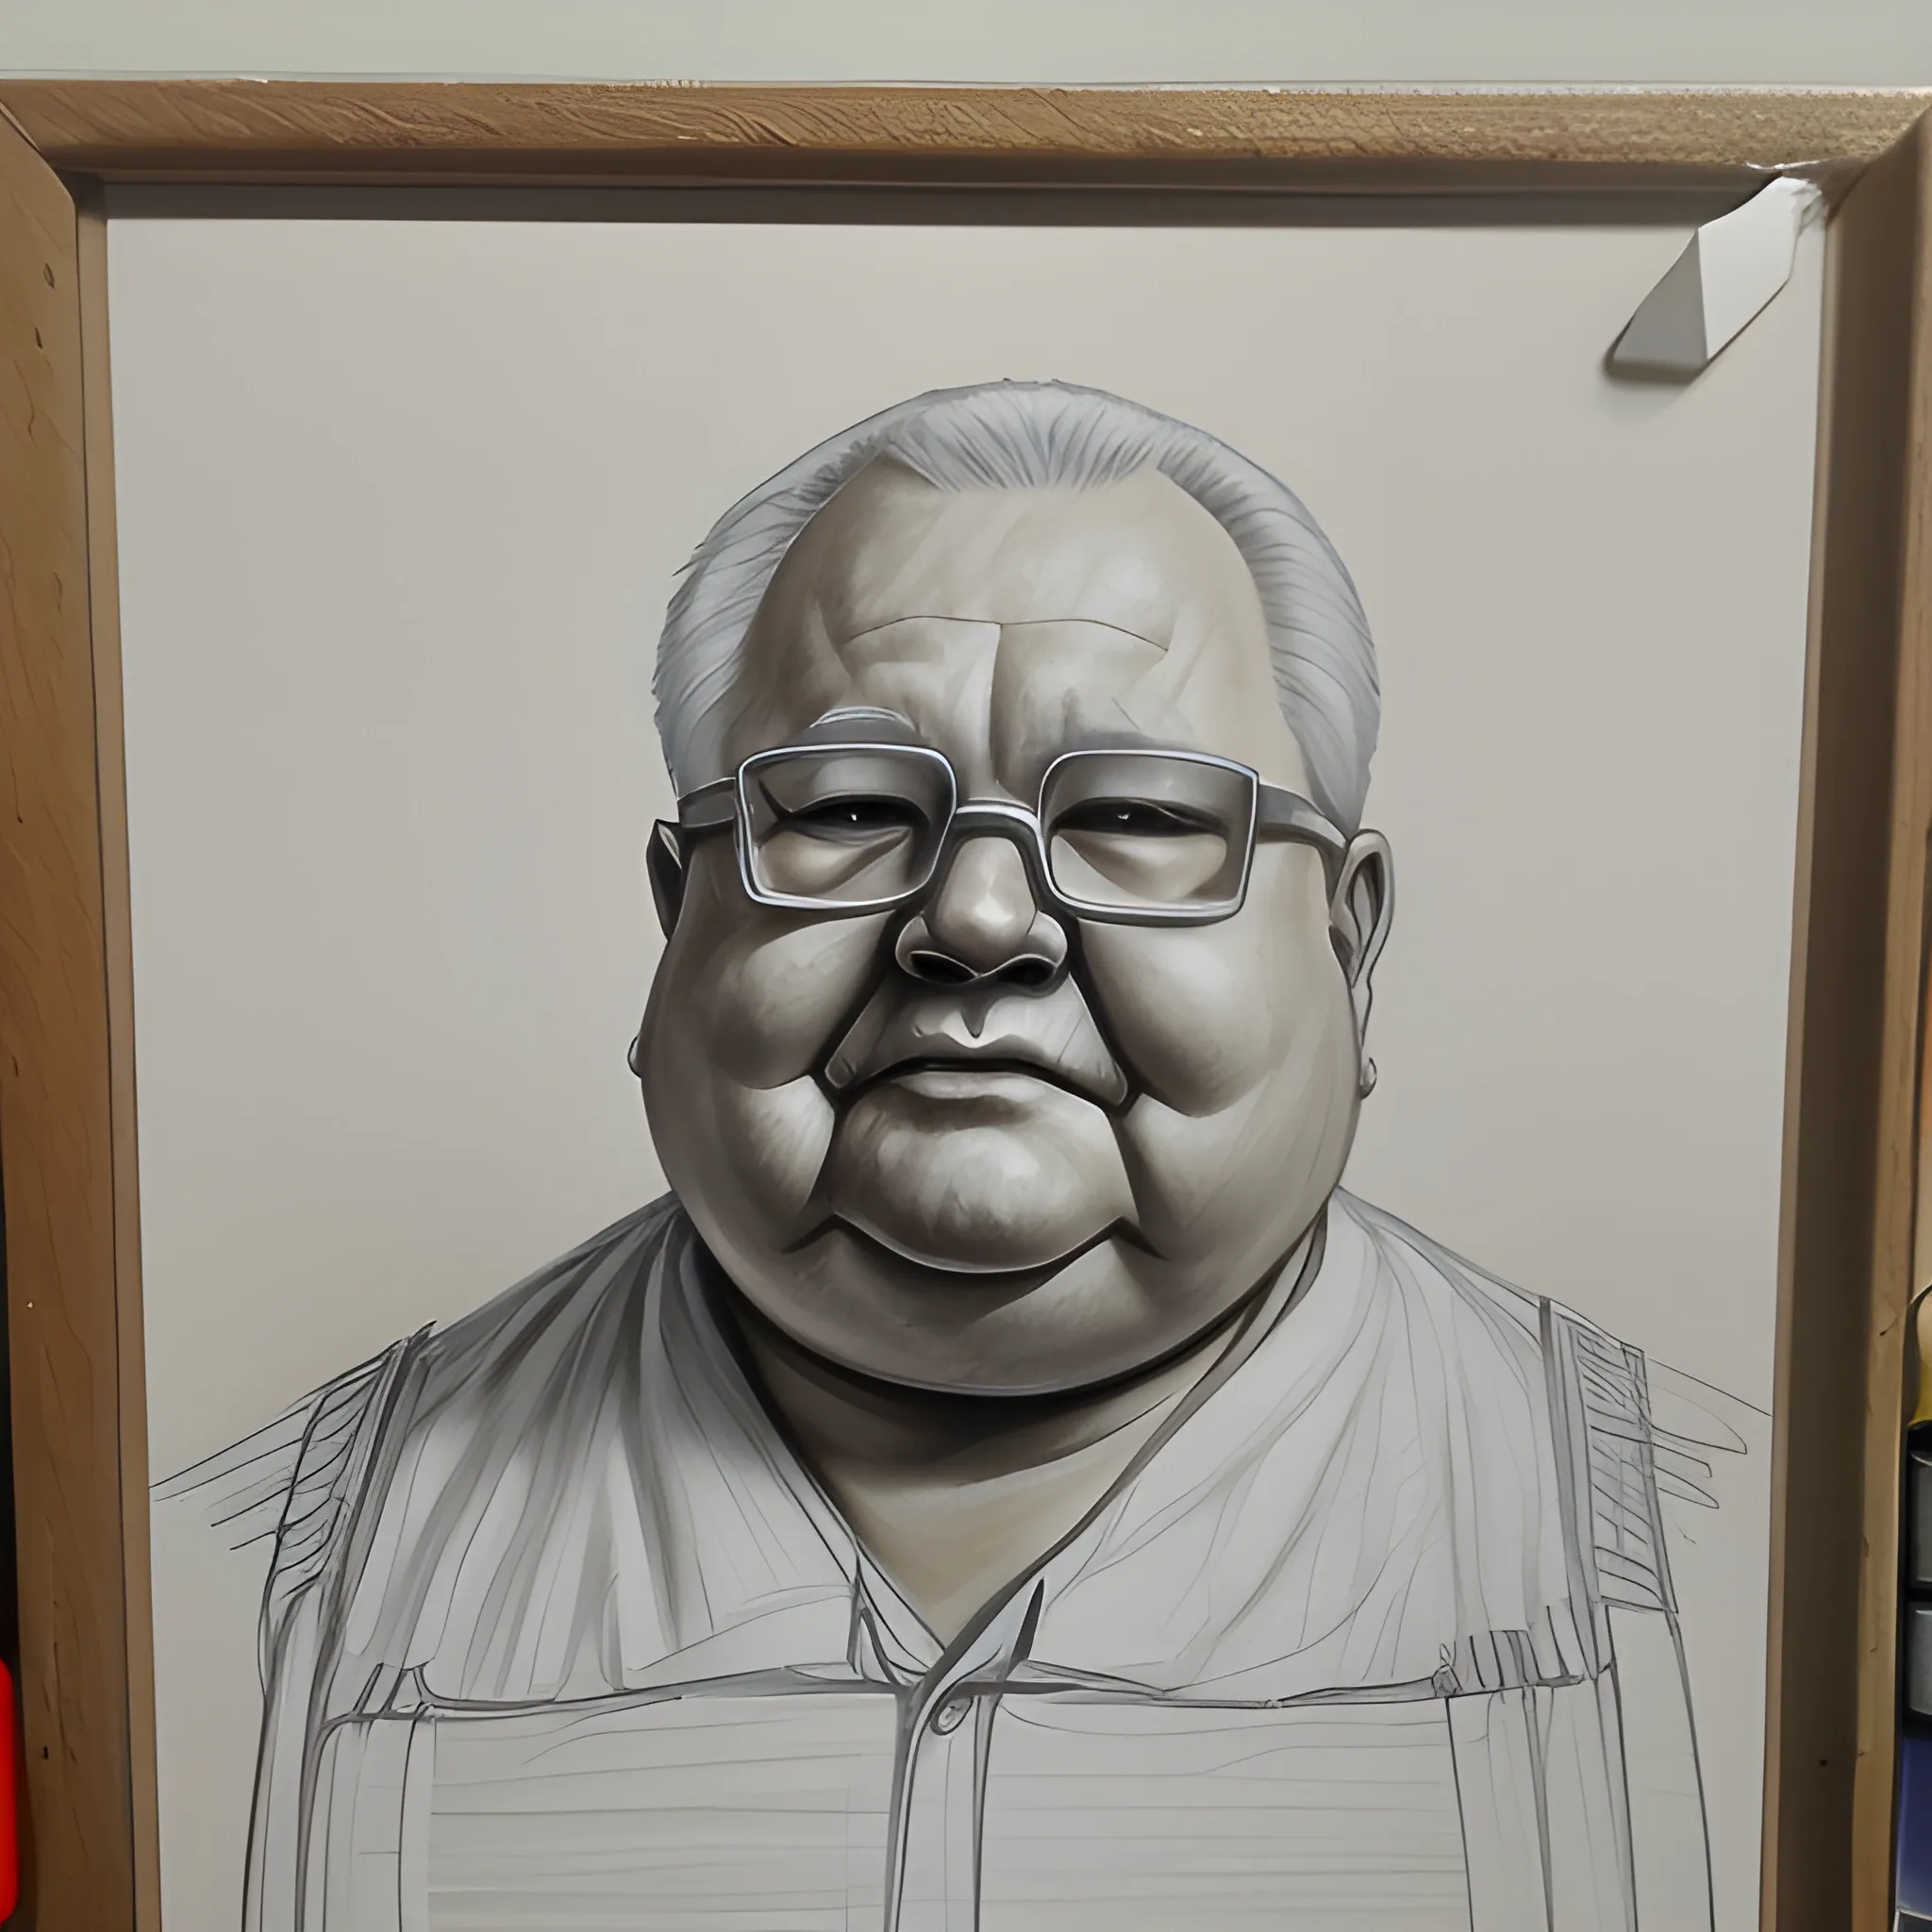 Man 70 years old fat, str8ct judge, Oil Painting, Pencil Sketch, 3D